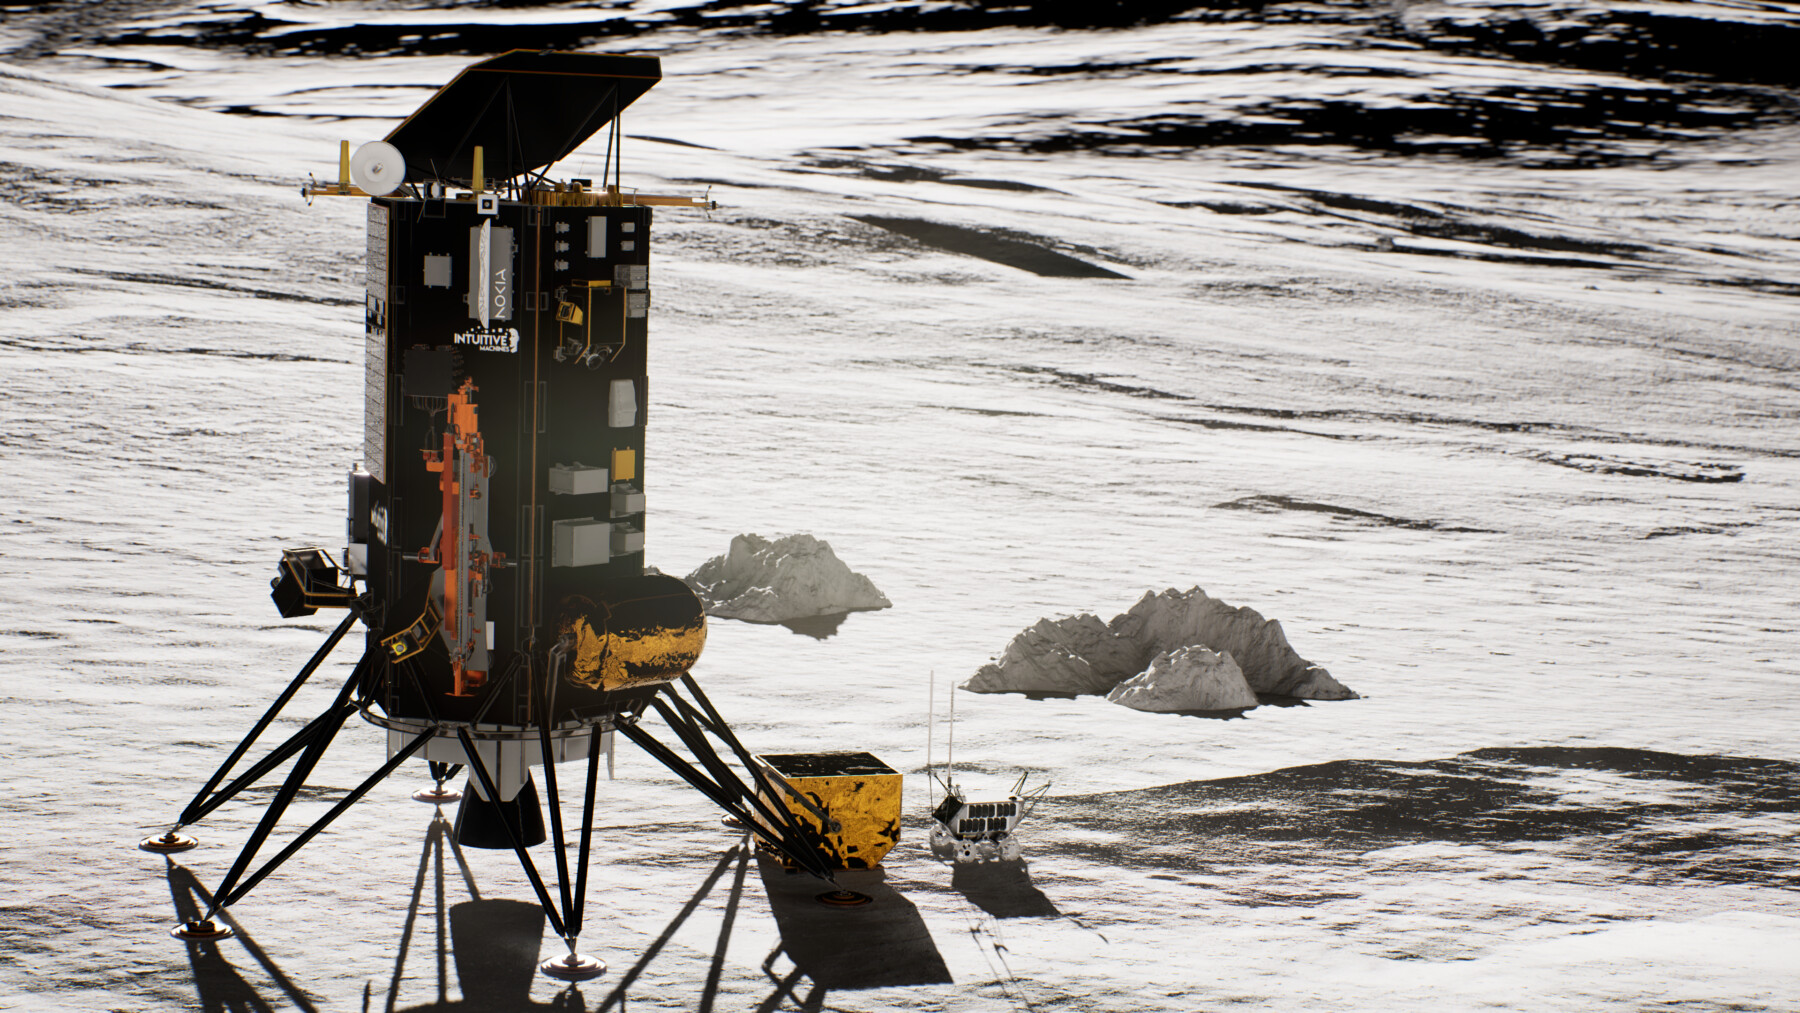 A small robotic vehicle moves away from a spacecraft on a grey rocky surface.